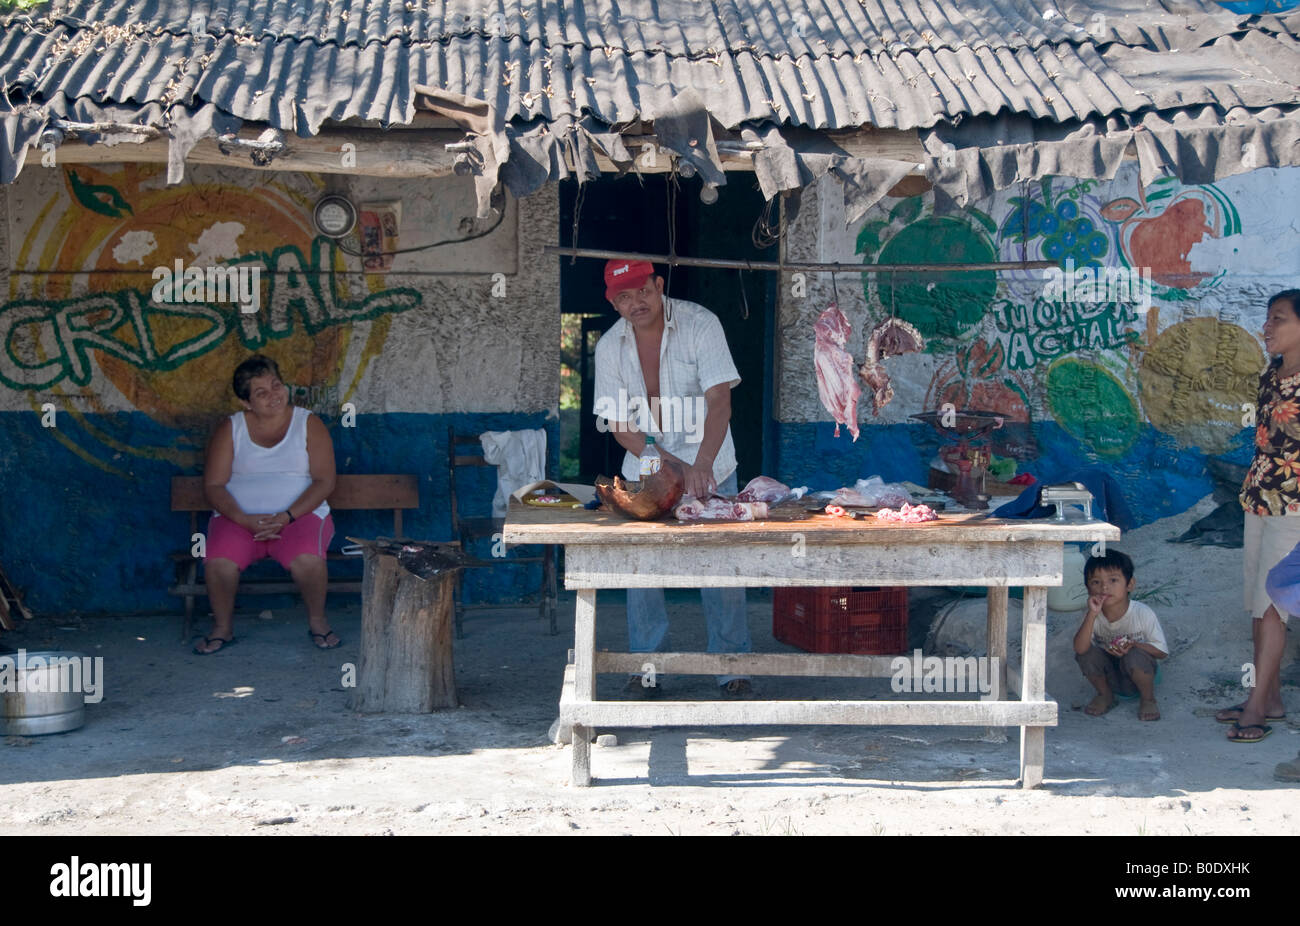 Road-side butcher's shop near Merida, Mexico. The mother, wife and son stand by whilst the father hacks up the meat outside. Stock Photo